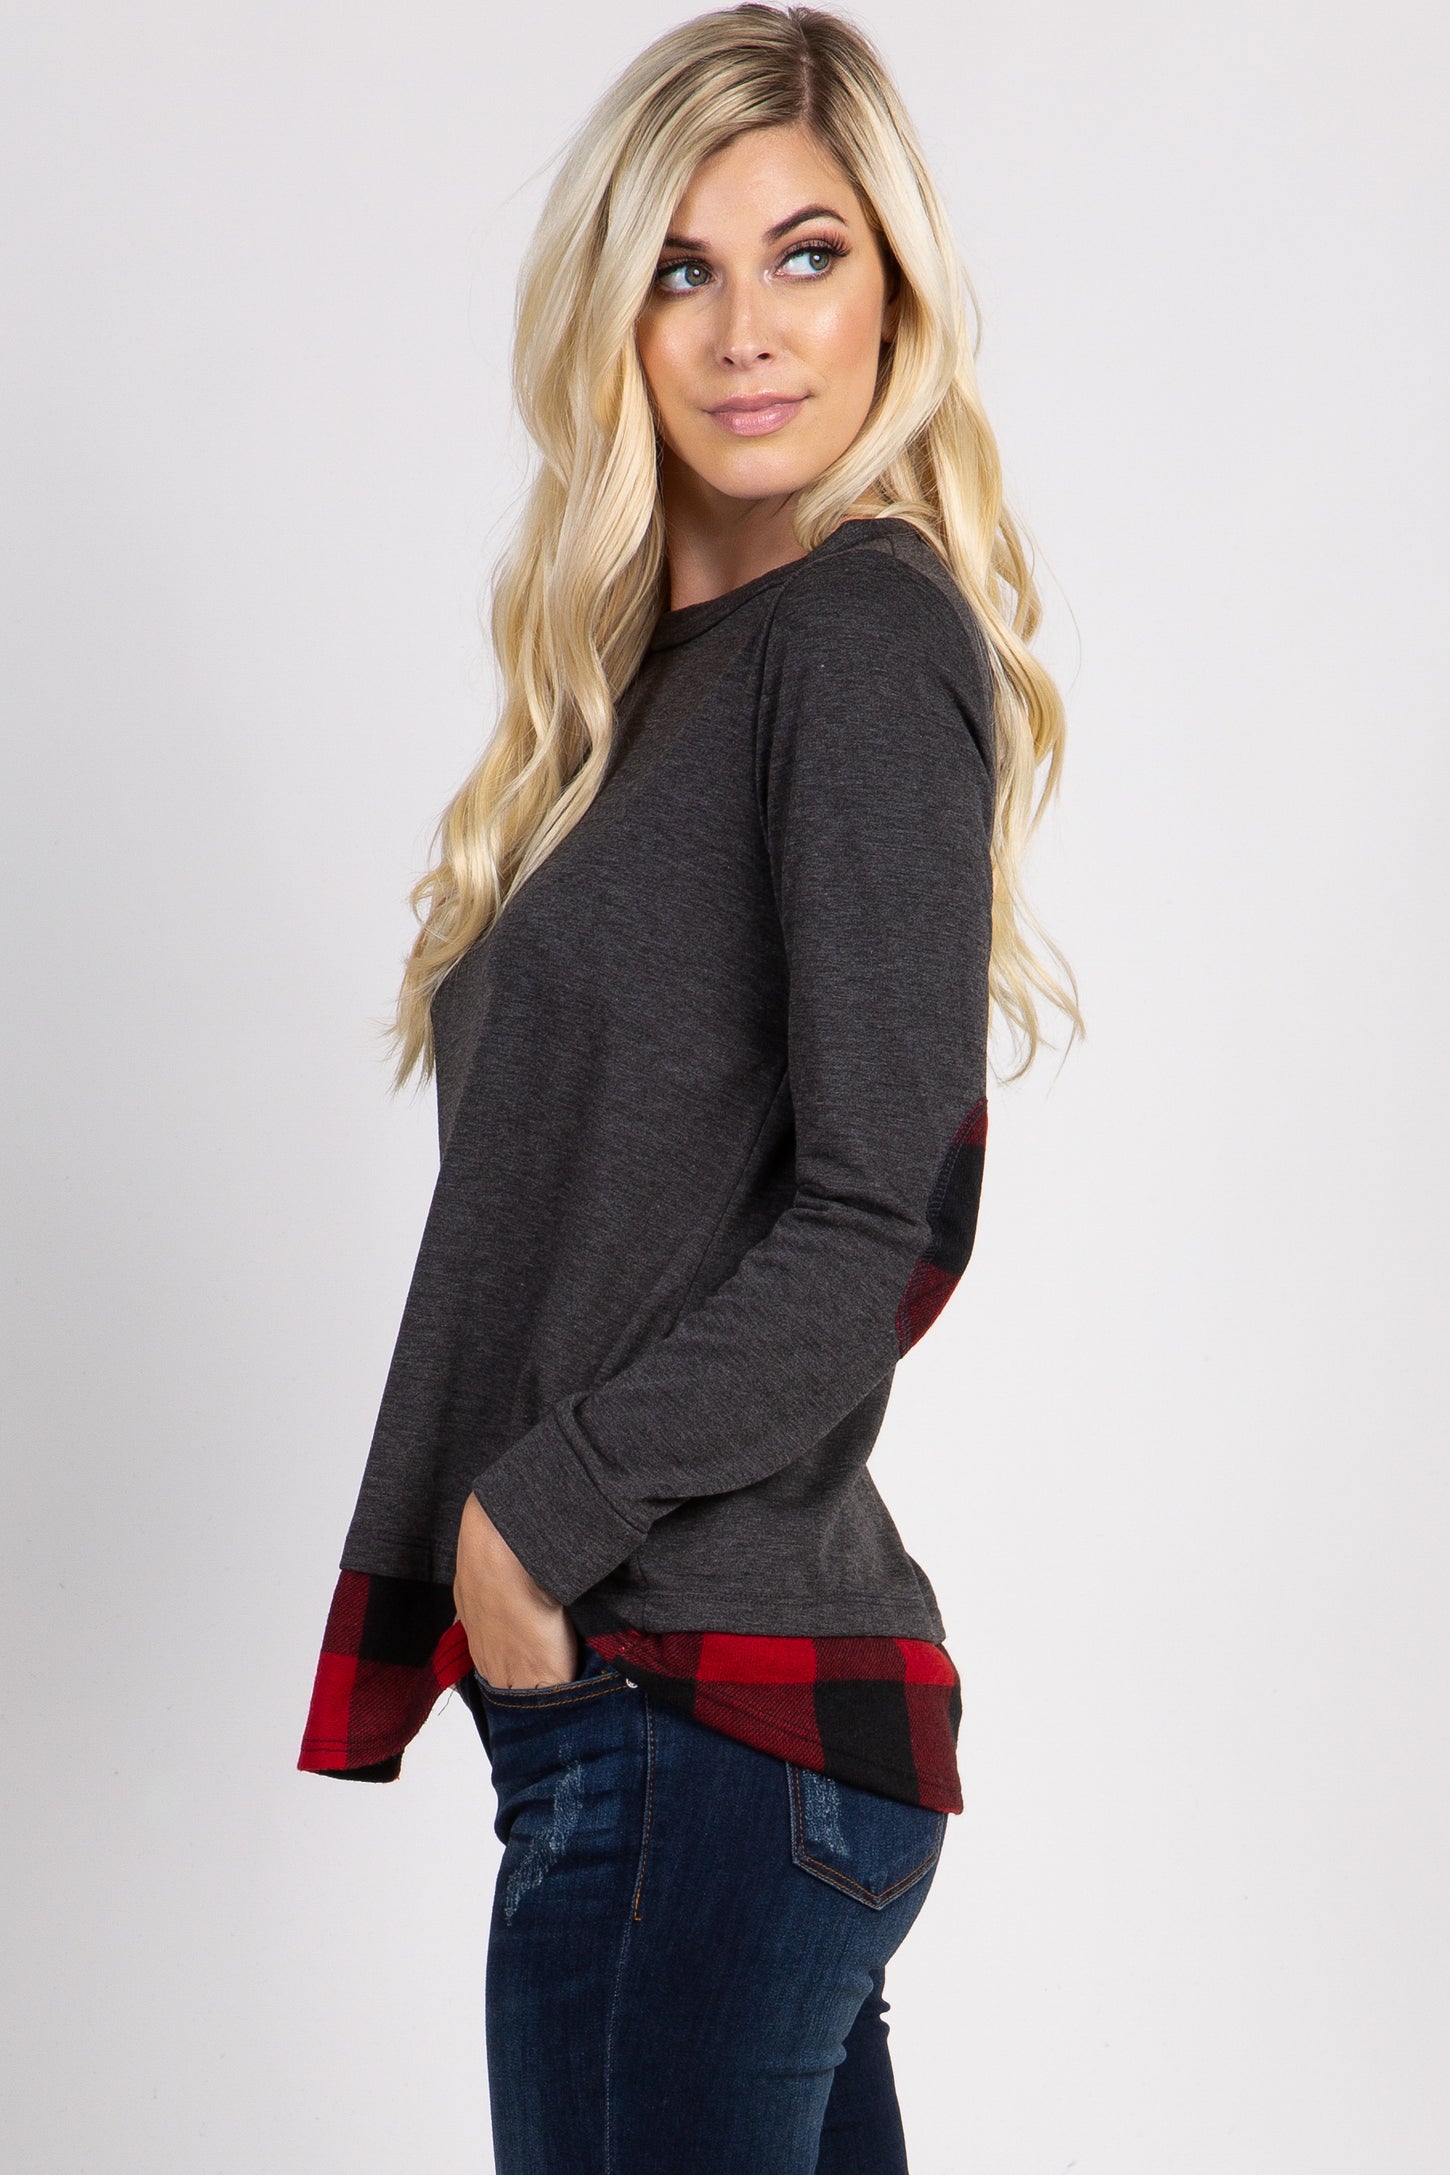 PinkBlush Charcoal Grey Solid Plaid Accent Long Sleeve Top